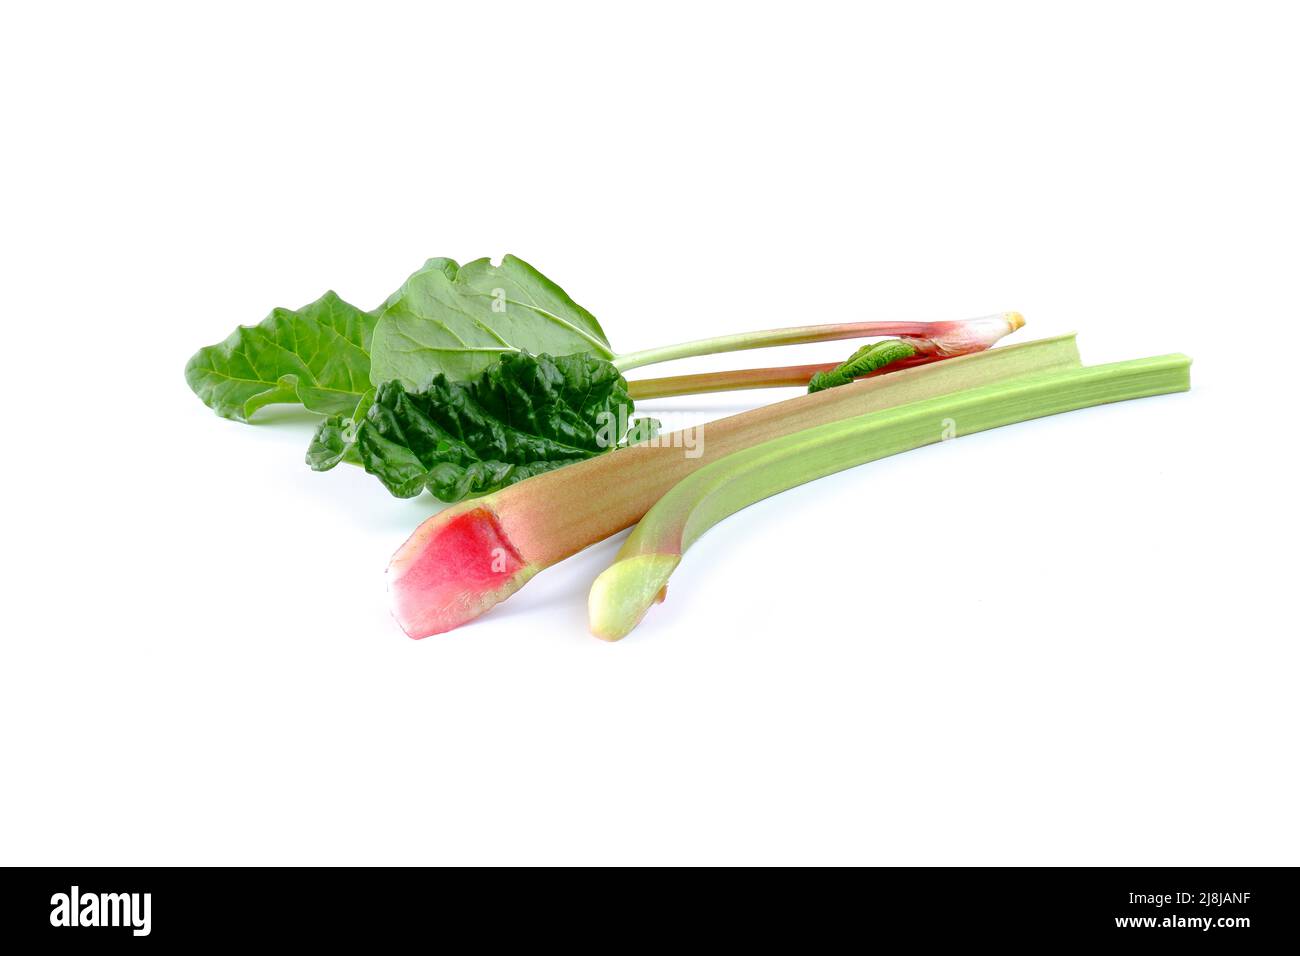 Red and green stems of rhubarb with leaves isolated on a white background. Fresh useful plant from the garden.  Stock Photo